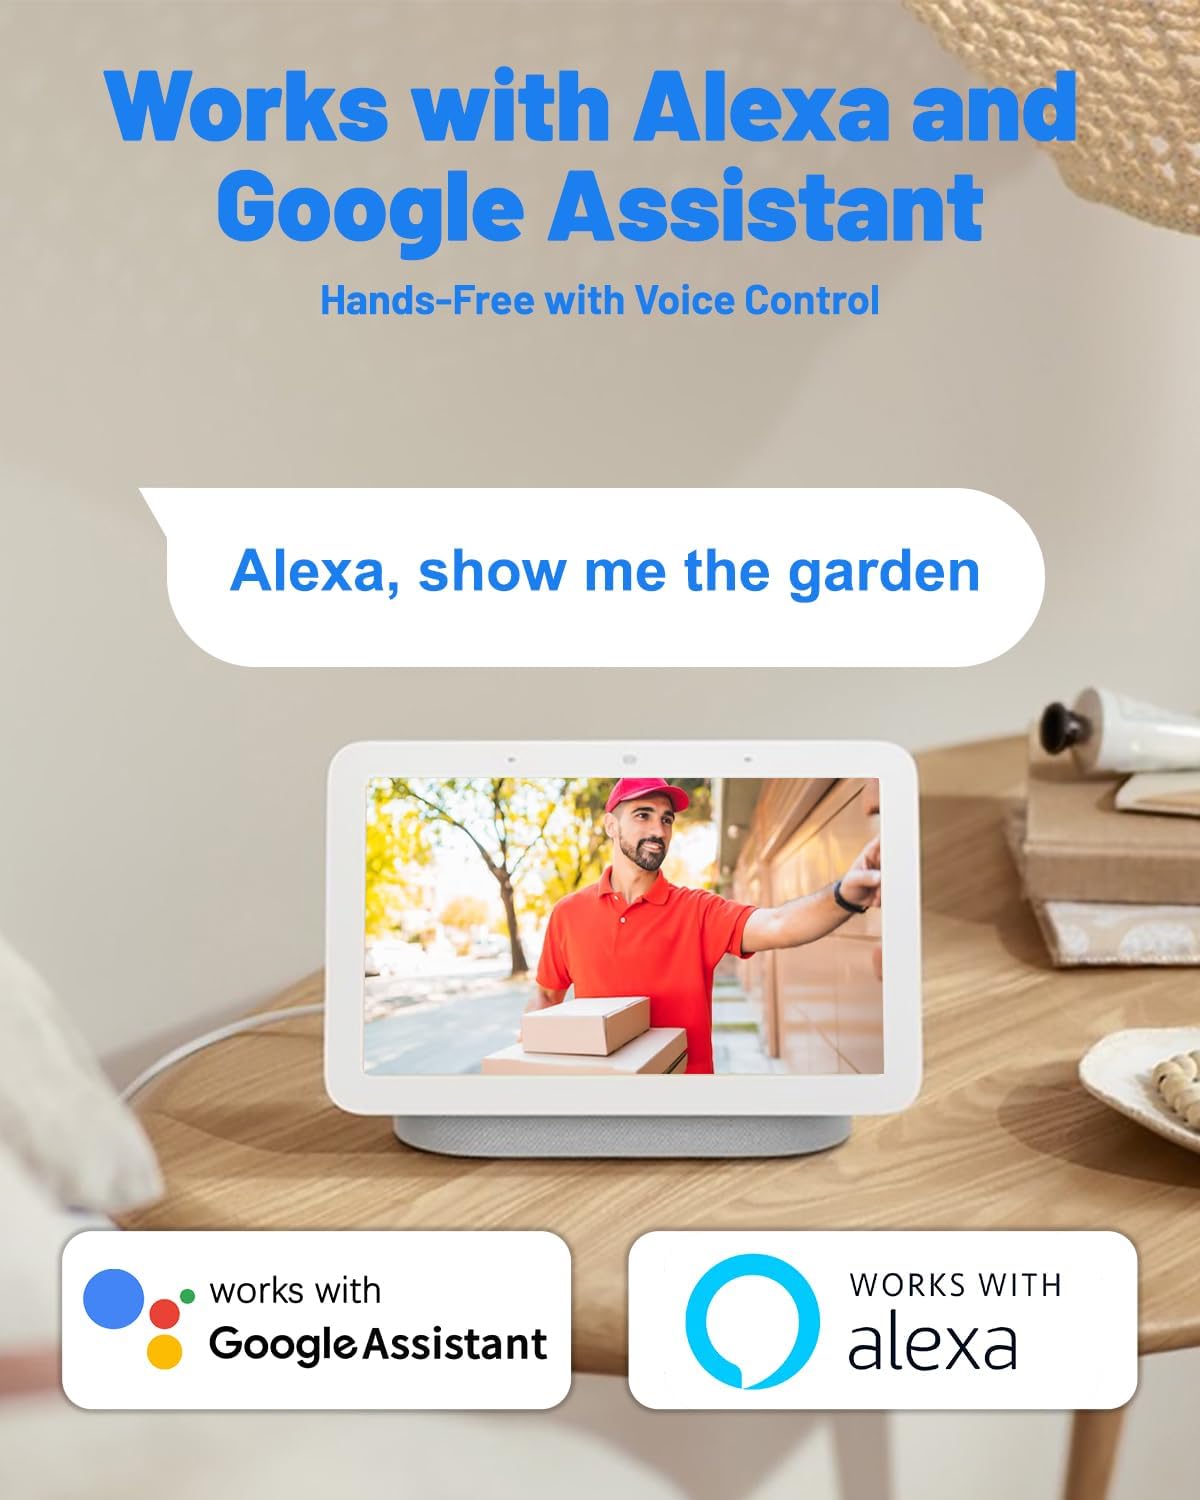 cameras for home security, works with Alexa and Google Assistant